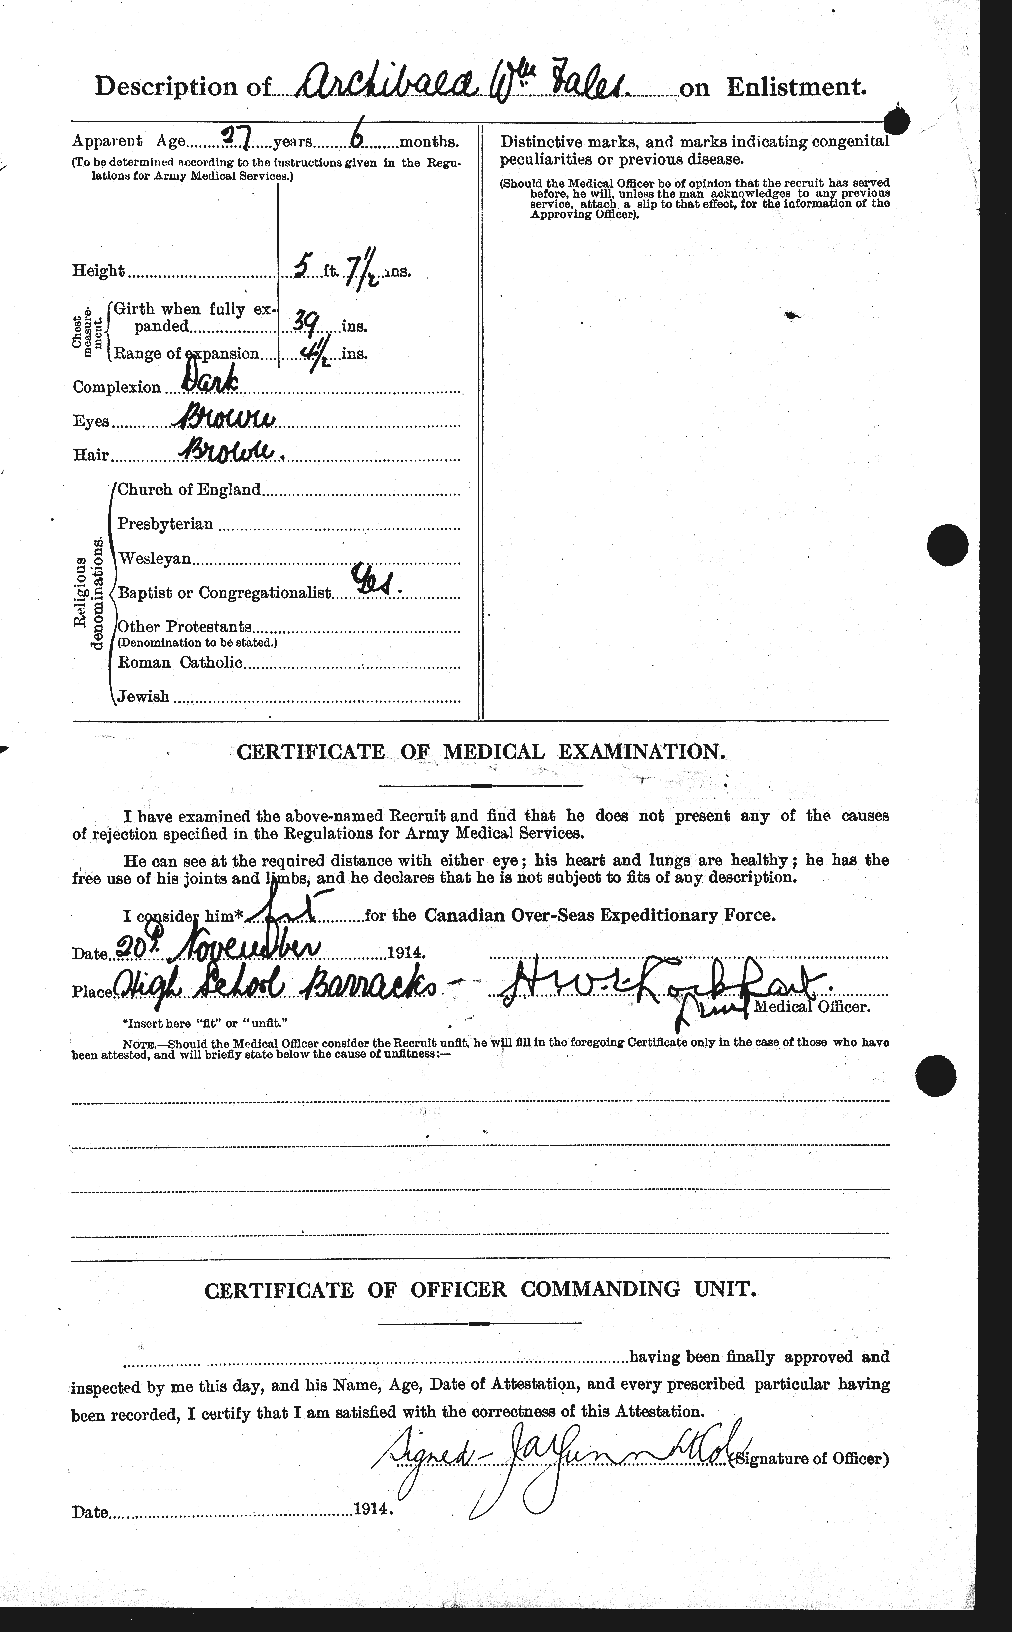 Personnel Records of the First World War - CEF 317030b